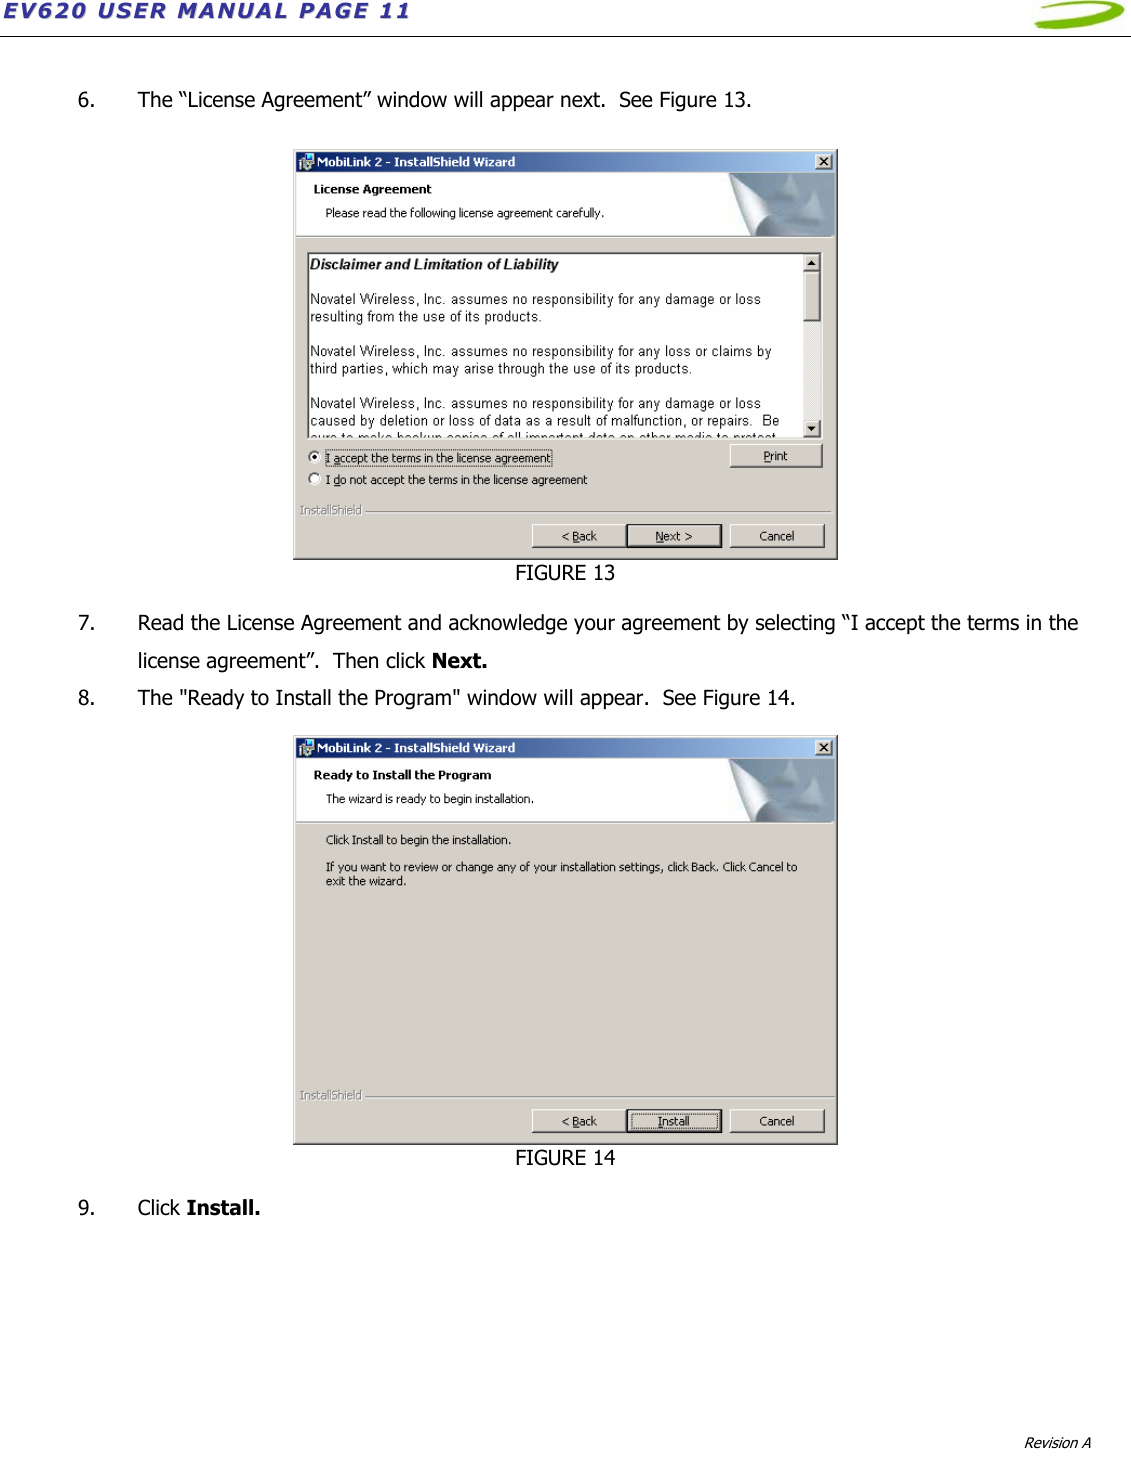 EEVV662200  UUSSEERR  MMAANNUUAALL  PPAAGGEE  1111              Revision A    6. The “License Agreement” window will appear next.  See Figure 13.   FIGURE 13  7. Read the License Agreement and acknowledge your agreement by selecting “I accept the terms in the license agreement”.  Then click Next. 8. The &quot;Ready to Install the Program&quot; window will appear.  See Figure 14.   FIGURE 14  9. Click Install.  